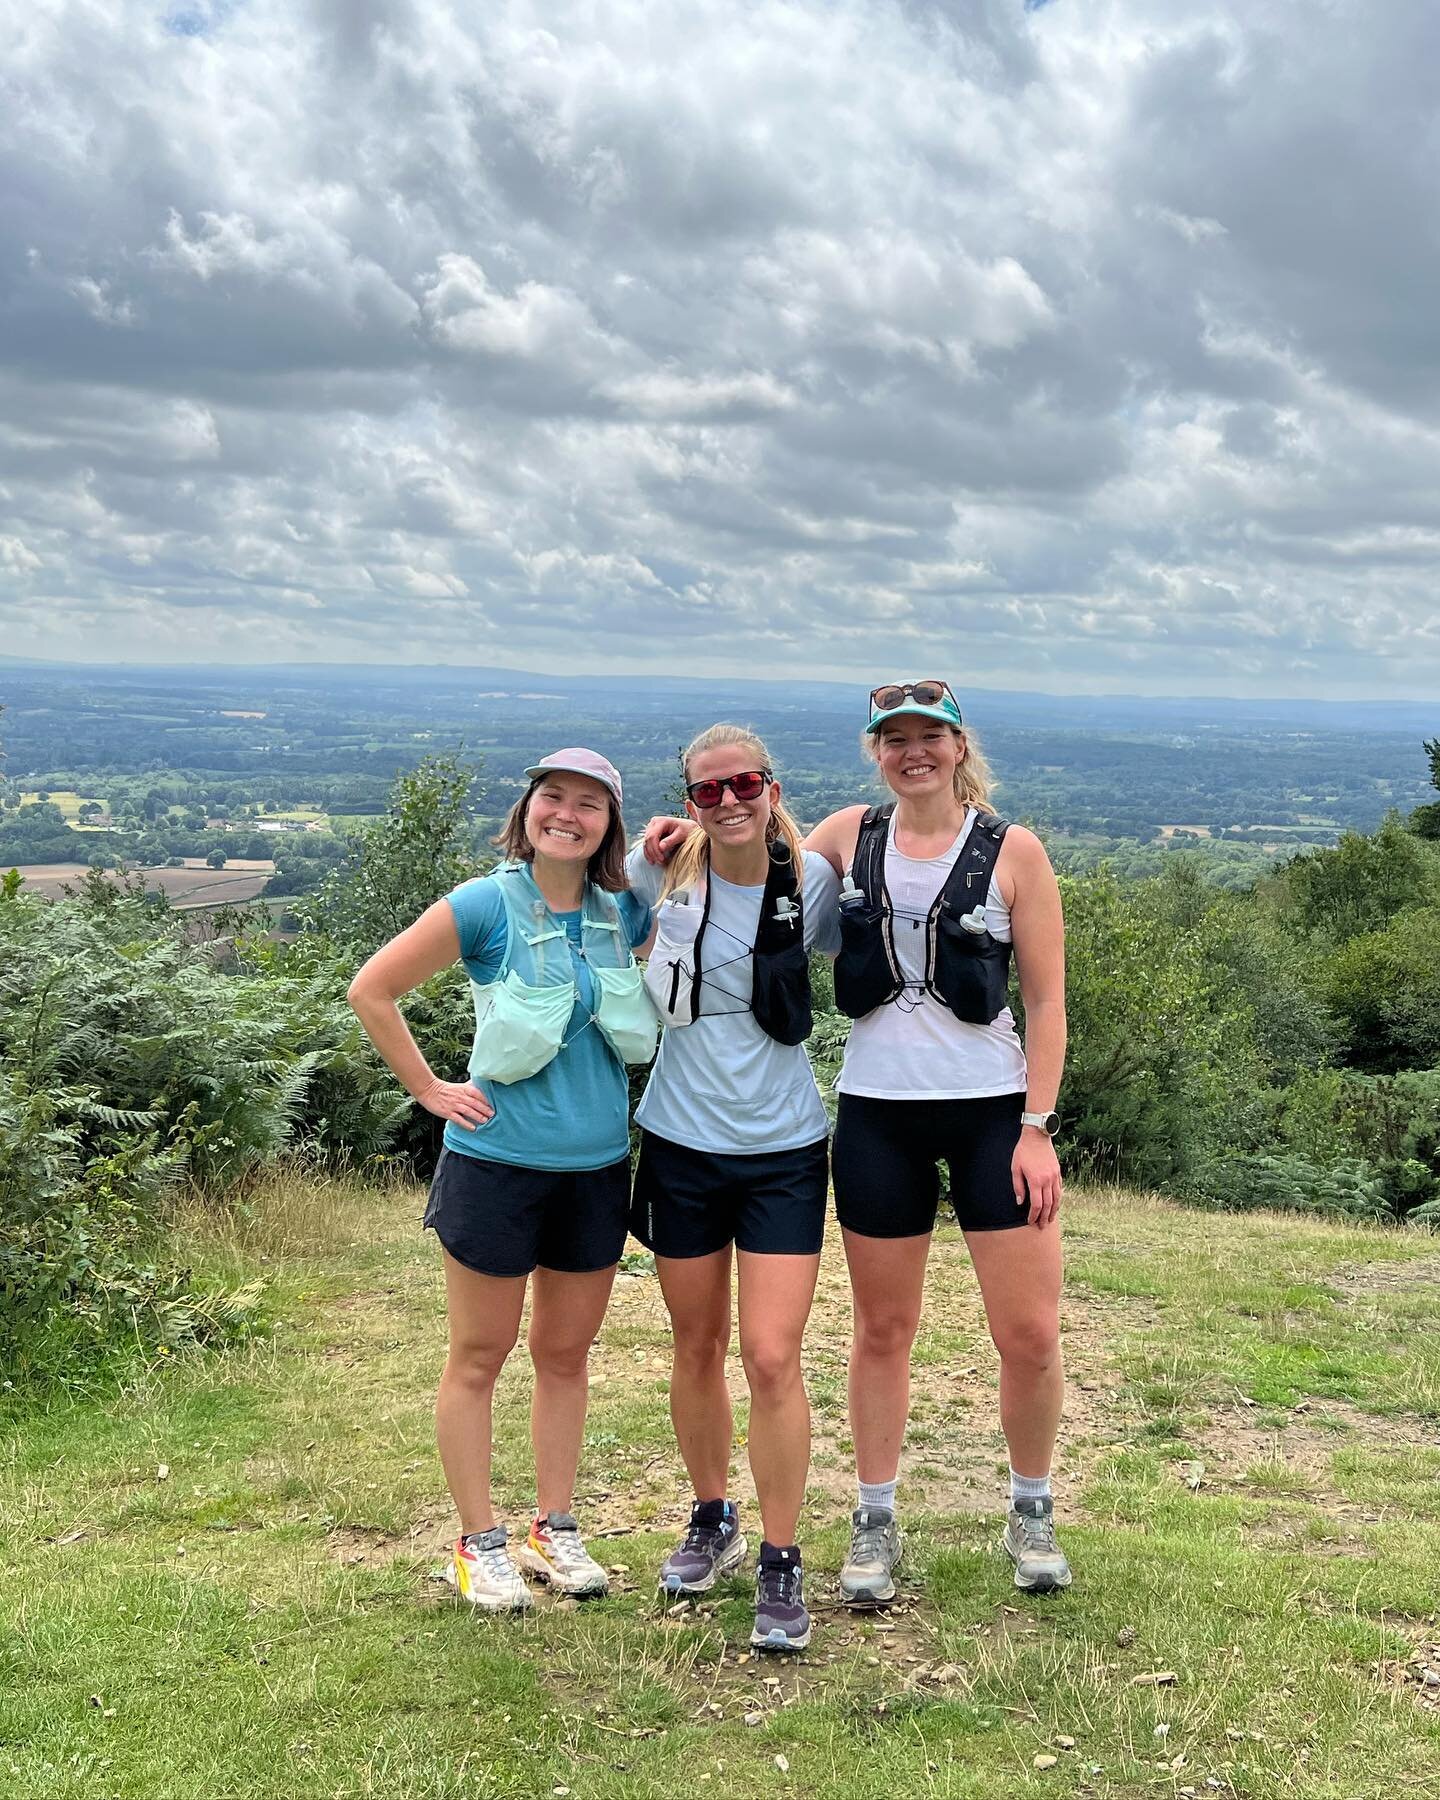 Adventures are always better with friends 😍 

Yesterday I spent 14 glorious miles exploring the Surrey Hills with Lizzie and Ivi. There were glorious views, stunning trails and just a little bit of bush whacking 😅, finished off with a much needed r